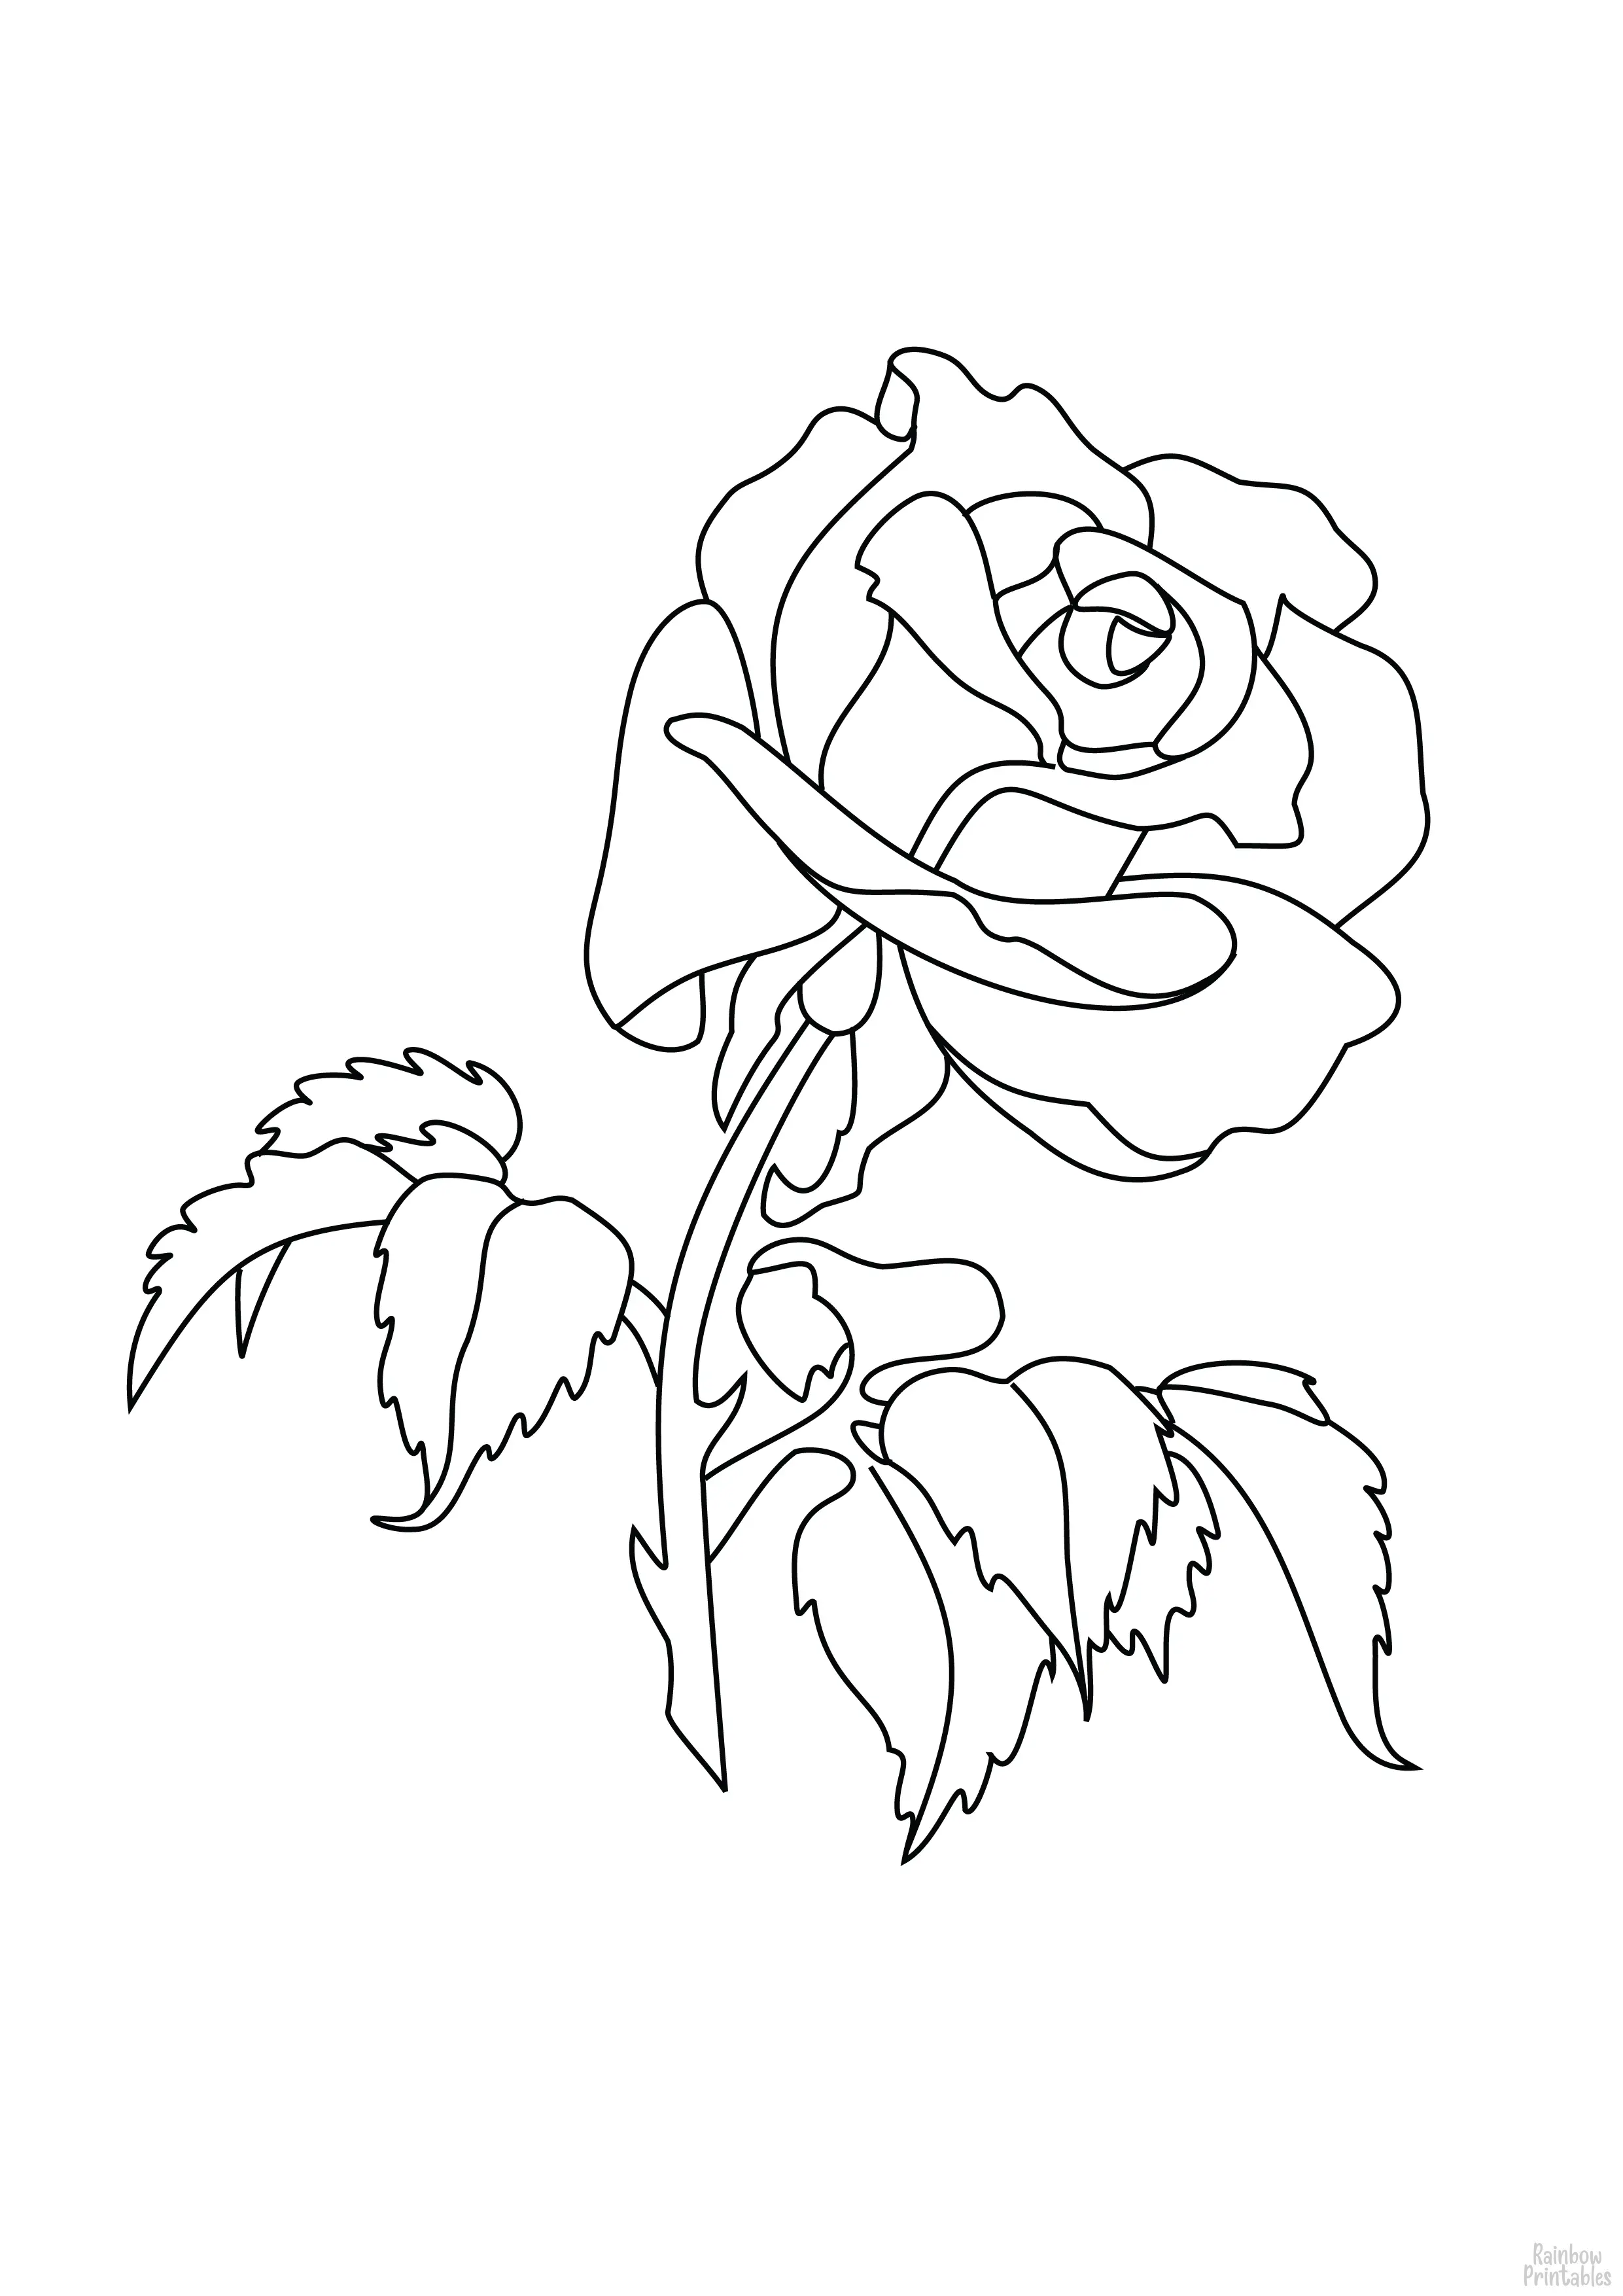 SIMPLE ROSE VALENTINE'S DAY Clipart Coloring Pages for Kids Adults Art Activities Line Art